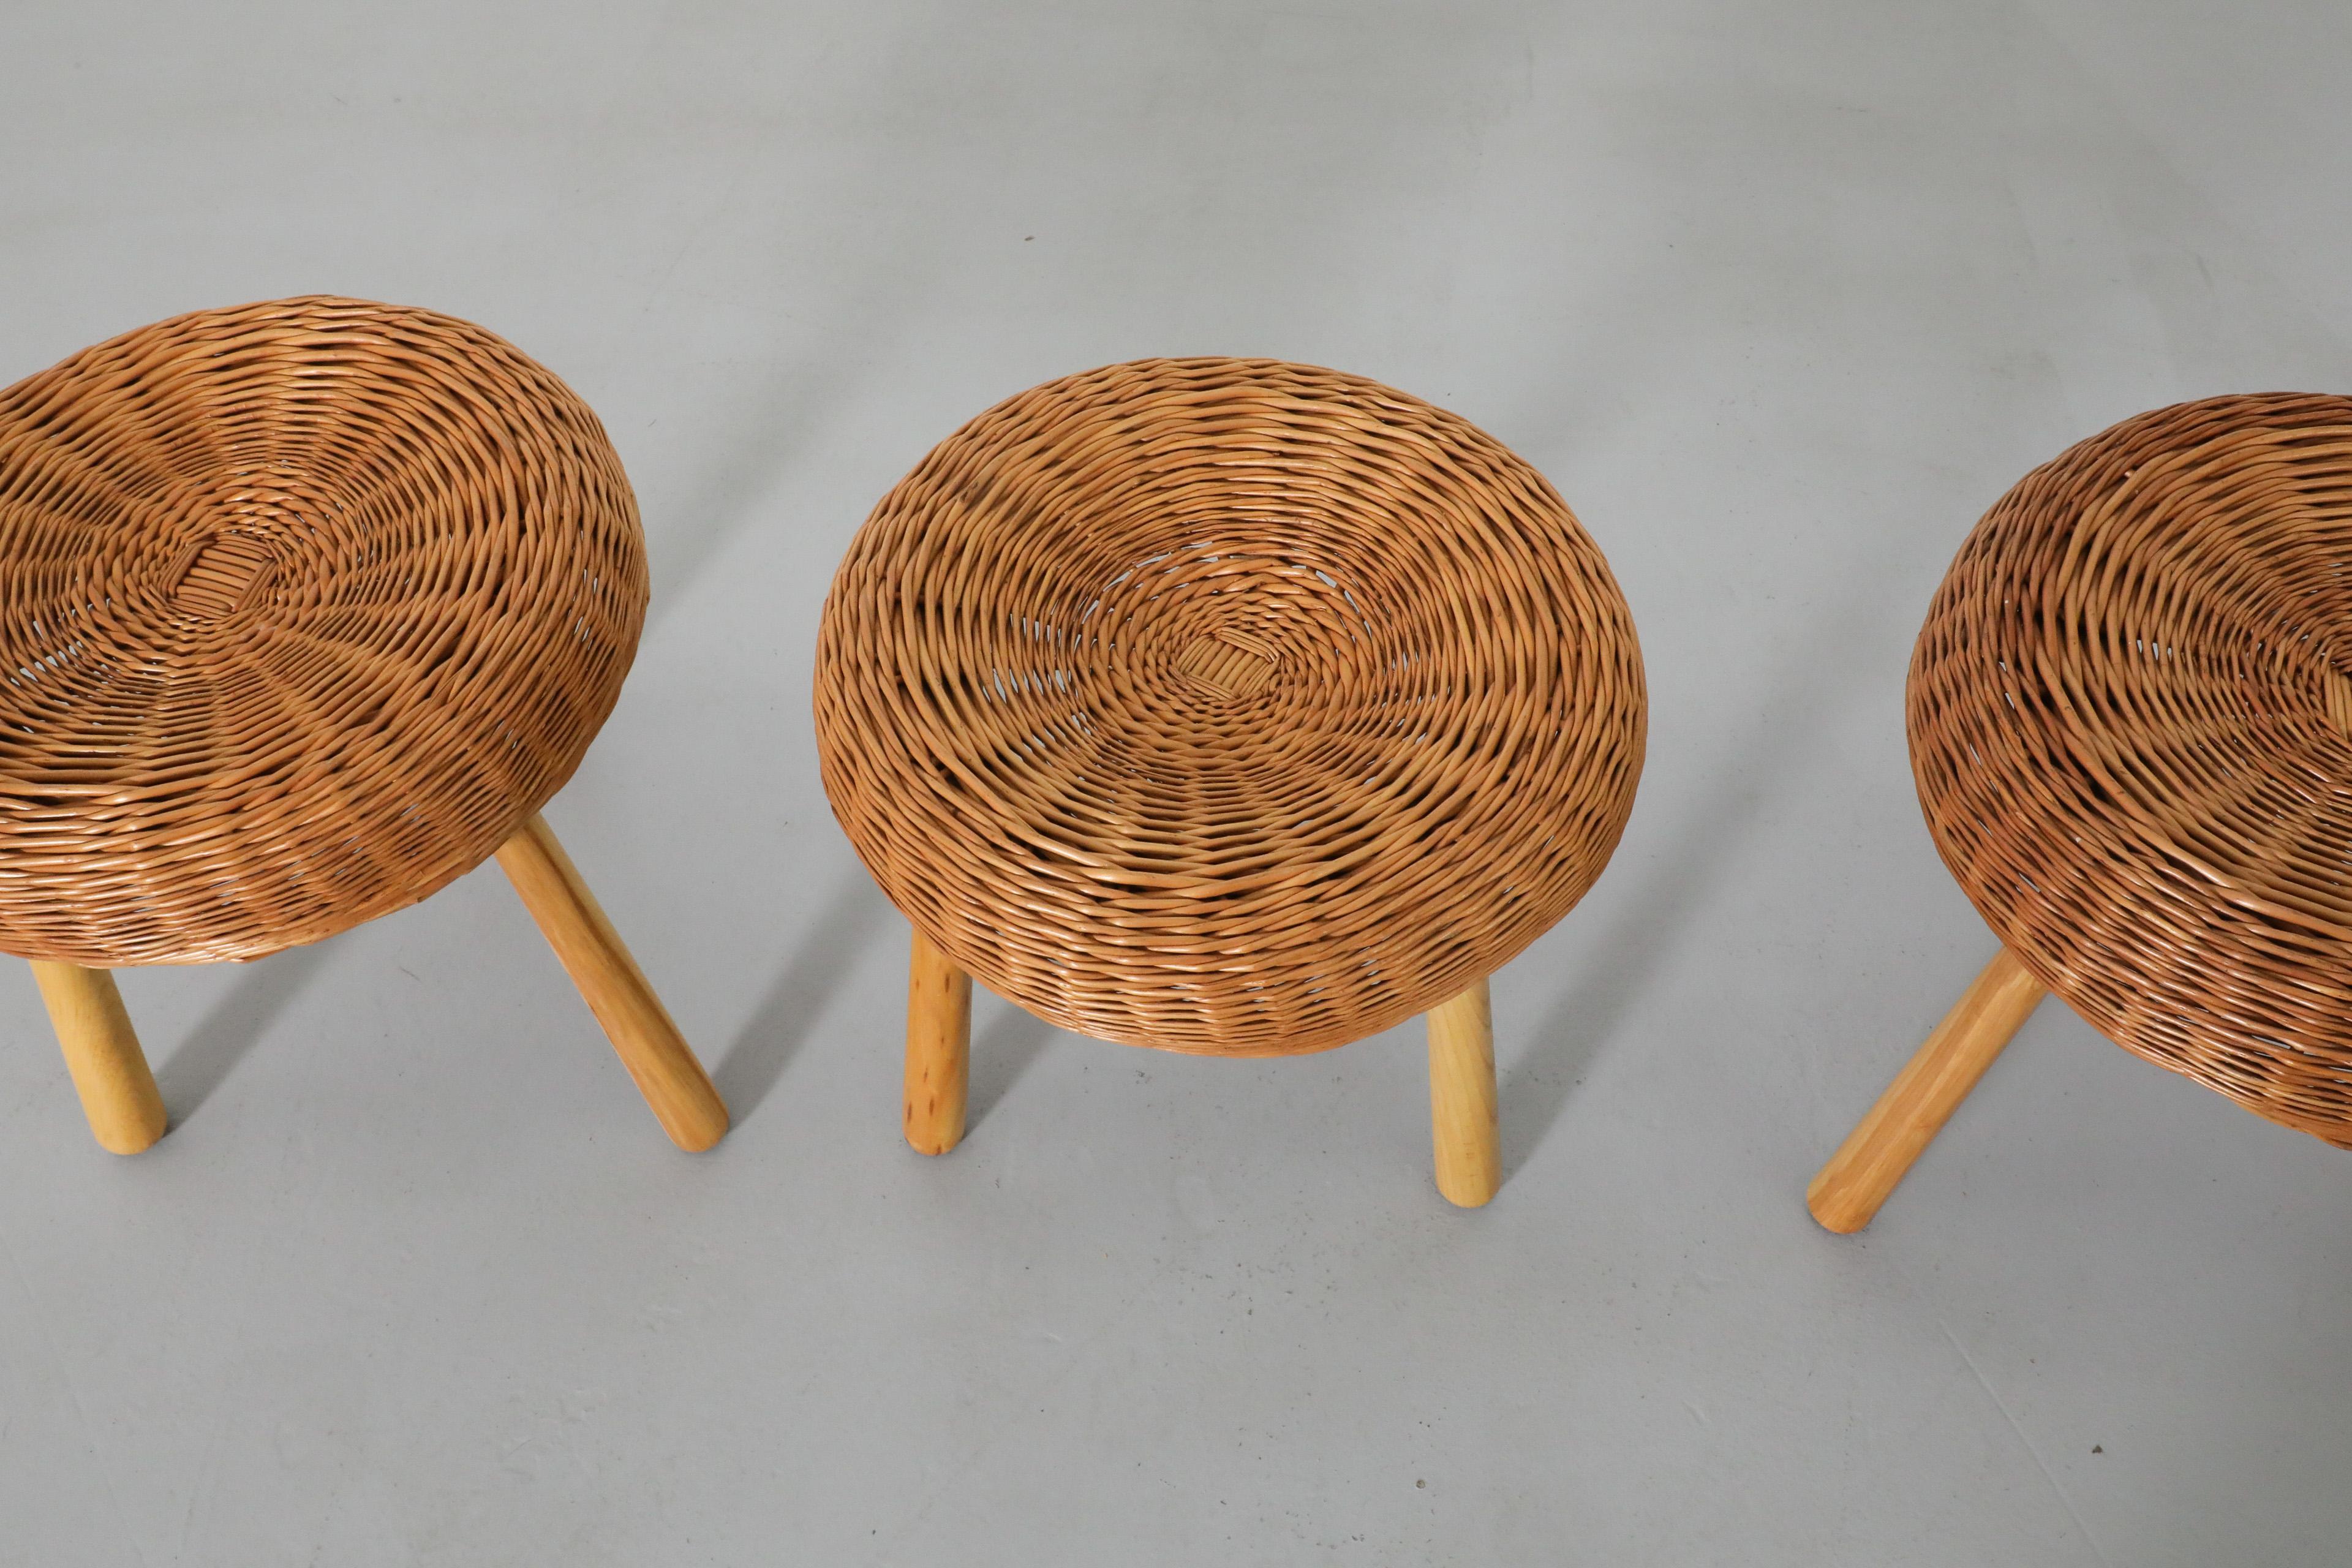 Tony Paul Attributed Woven Rattan Tripod Stools with Tapered Solid Wood Legs For Sale 2